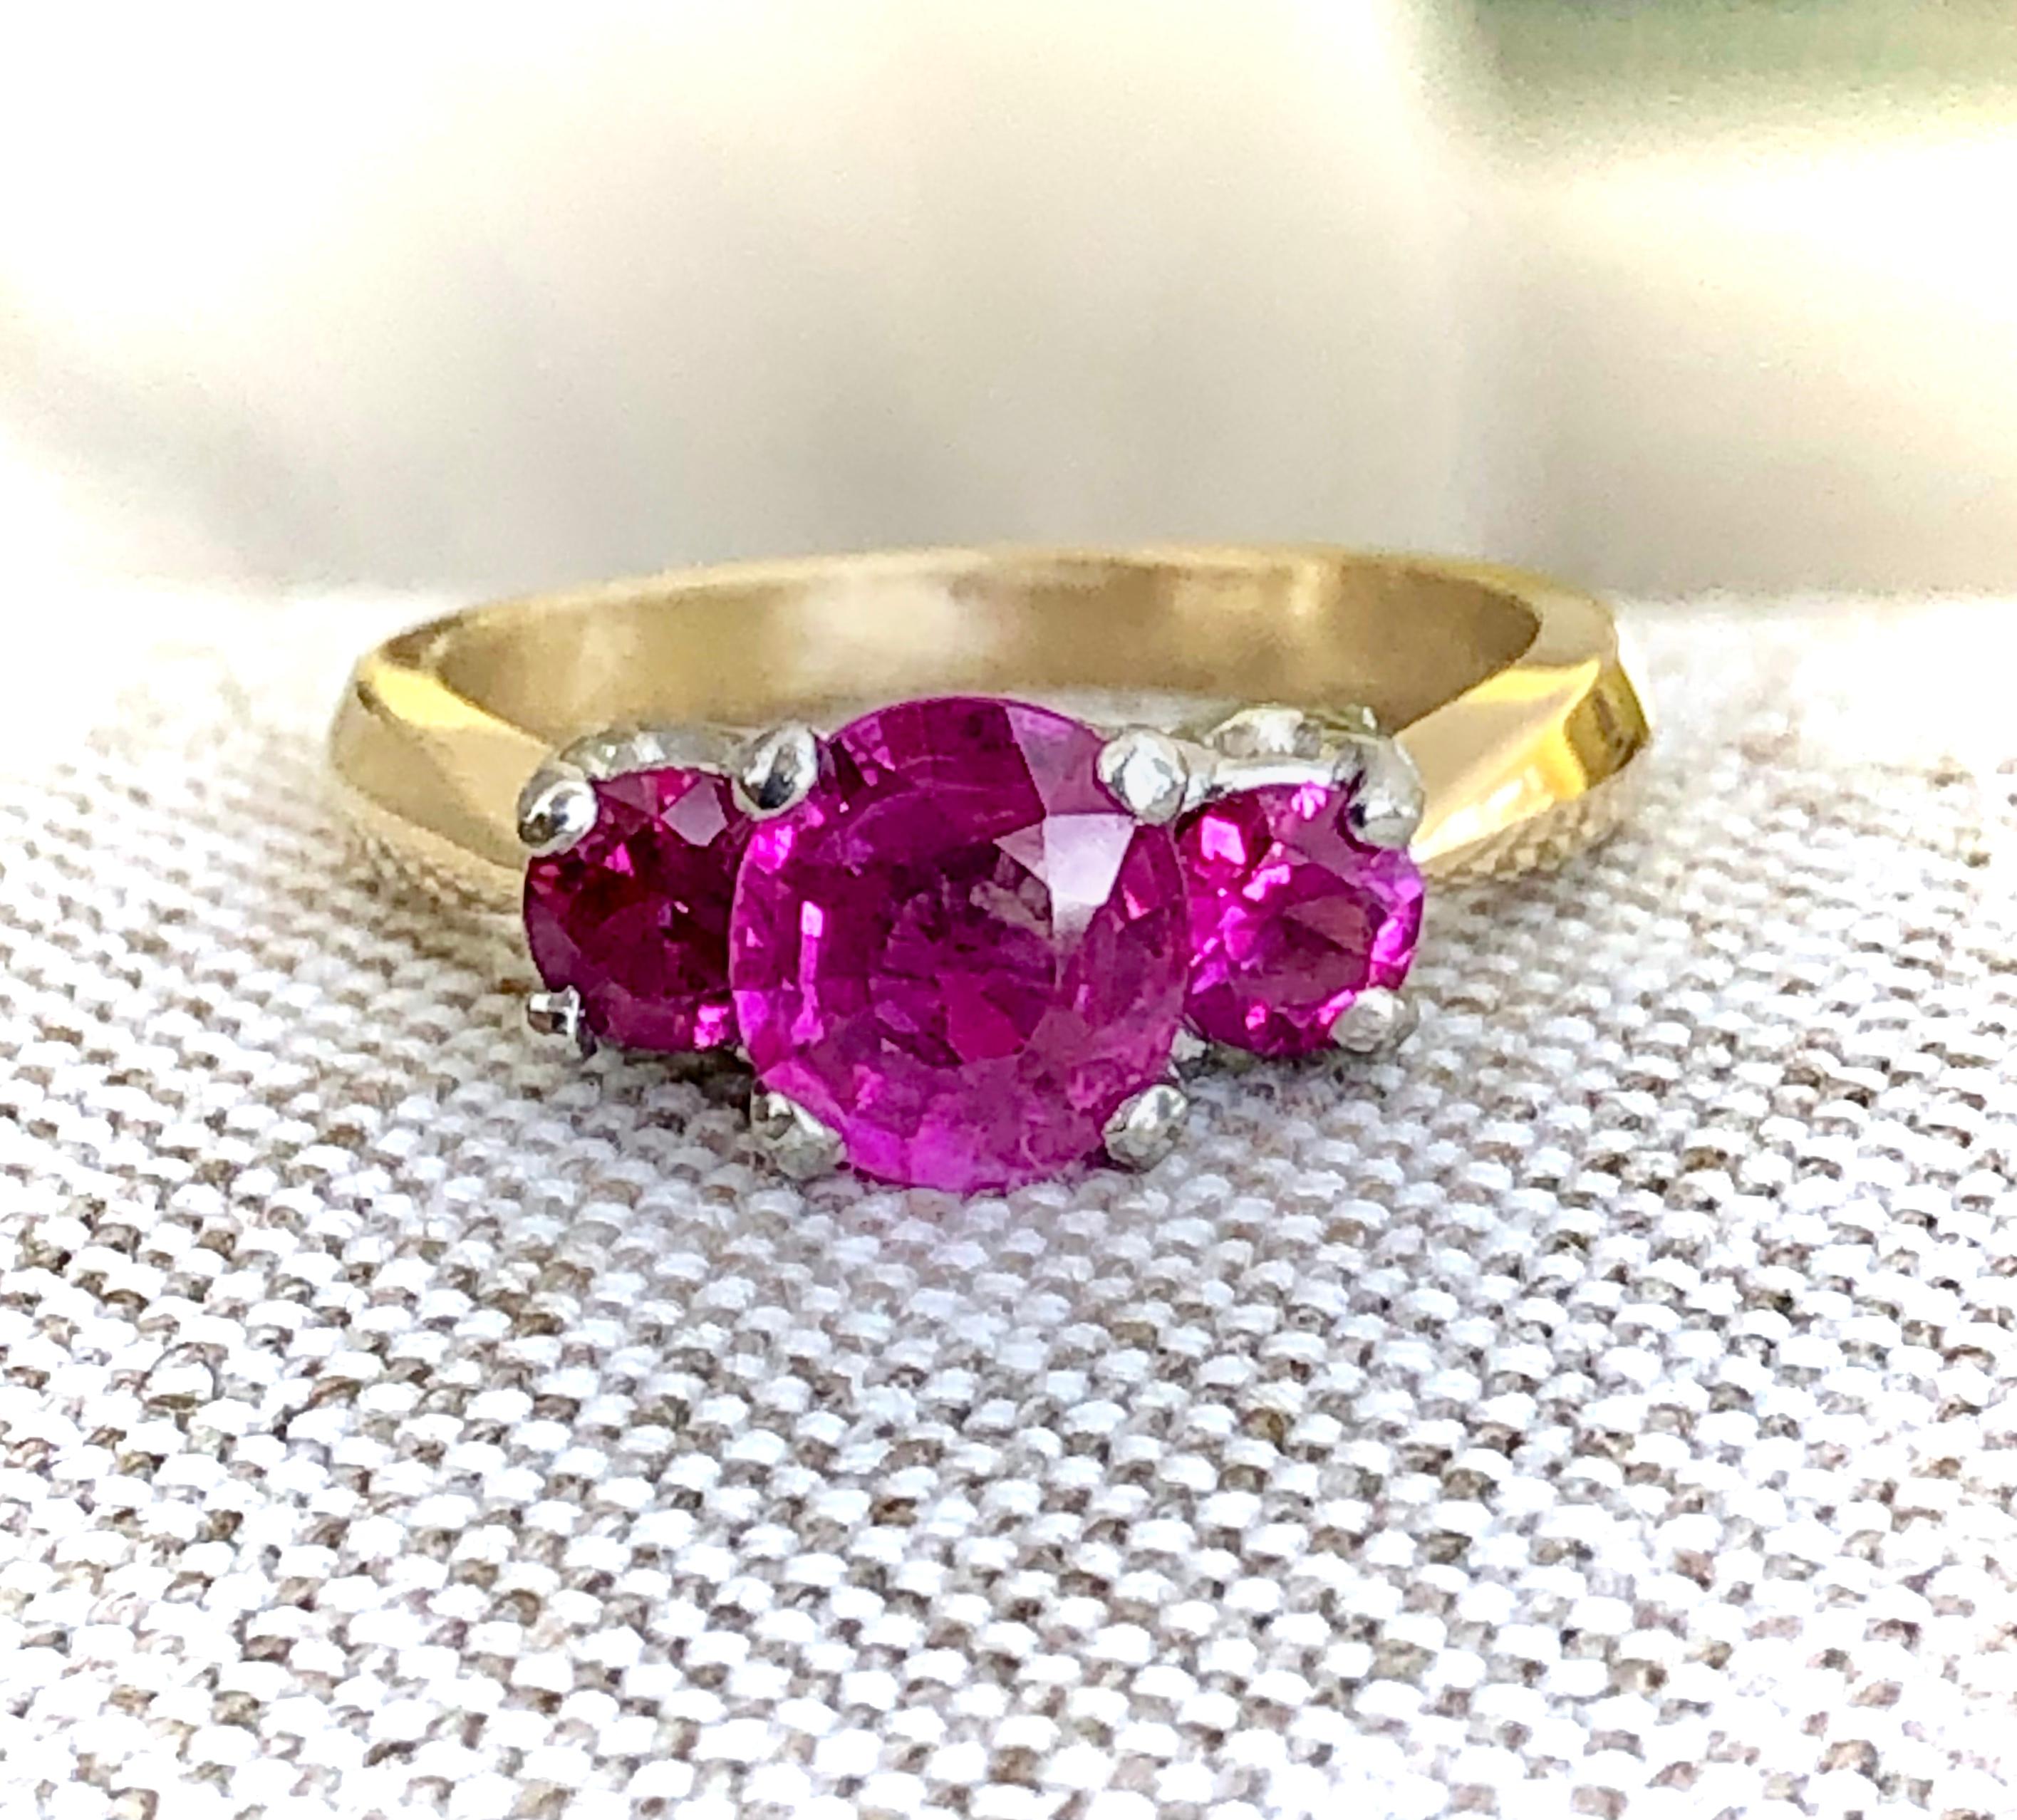 An estate vibrant pinkish red semi-oval-cut natural Burmese ruby, weighing 1.36 carats, between a sparkling pair of two Burmese rubies, together weighing 0.75 carats, set in a very classic three-stone platinum and 18K yellow gold mounting. The